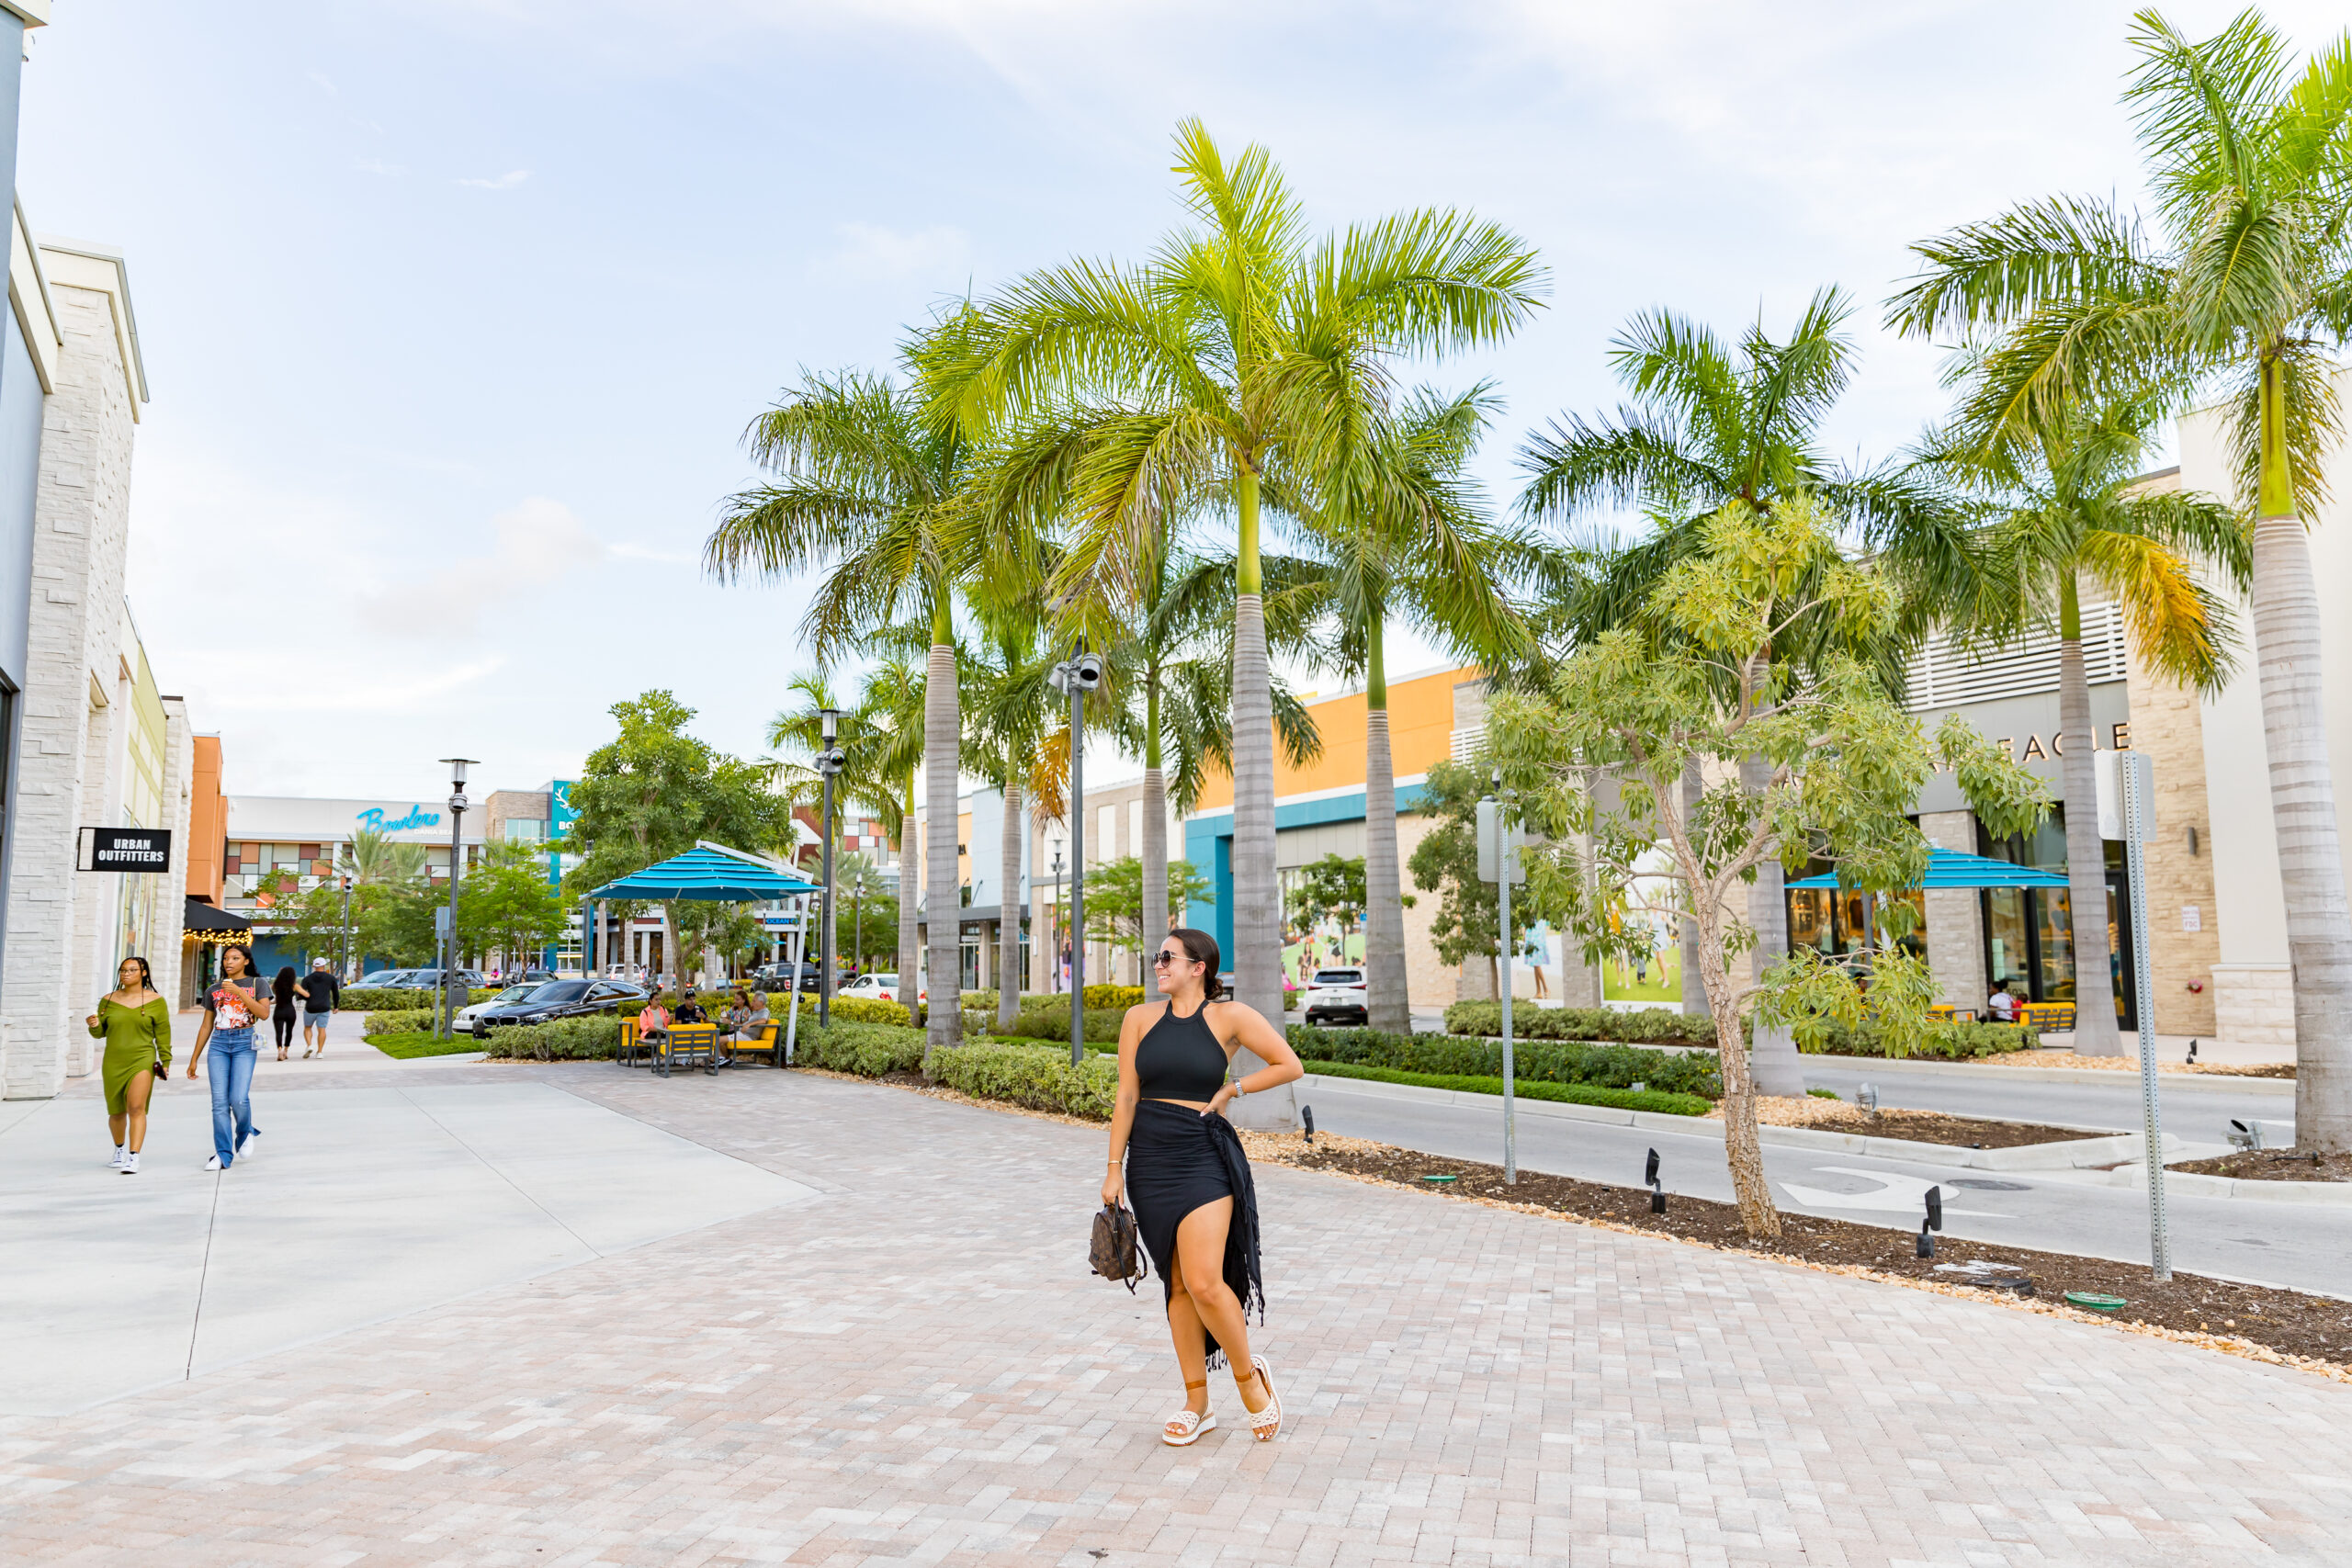 Why You Should Visit Dania Pointe